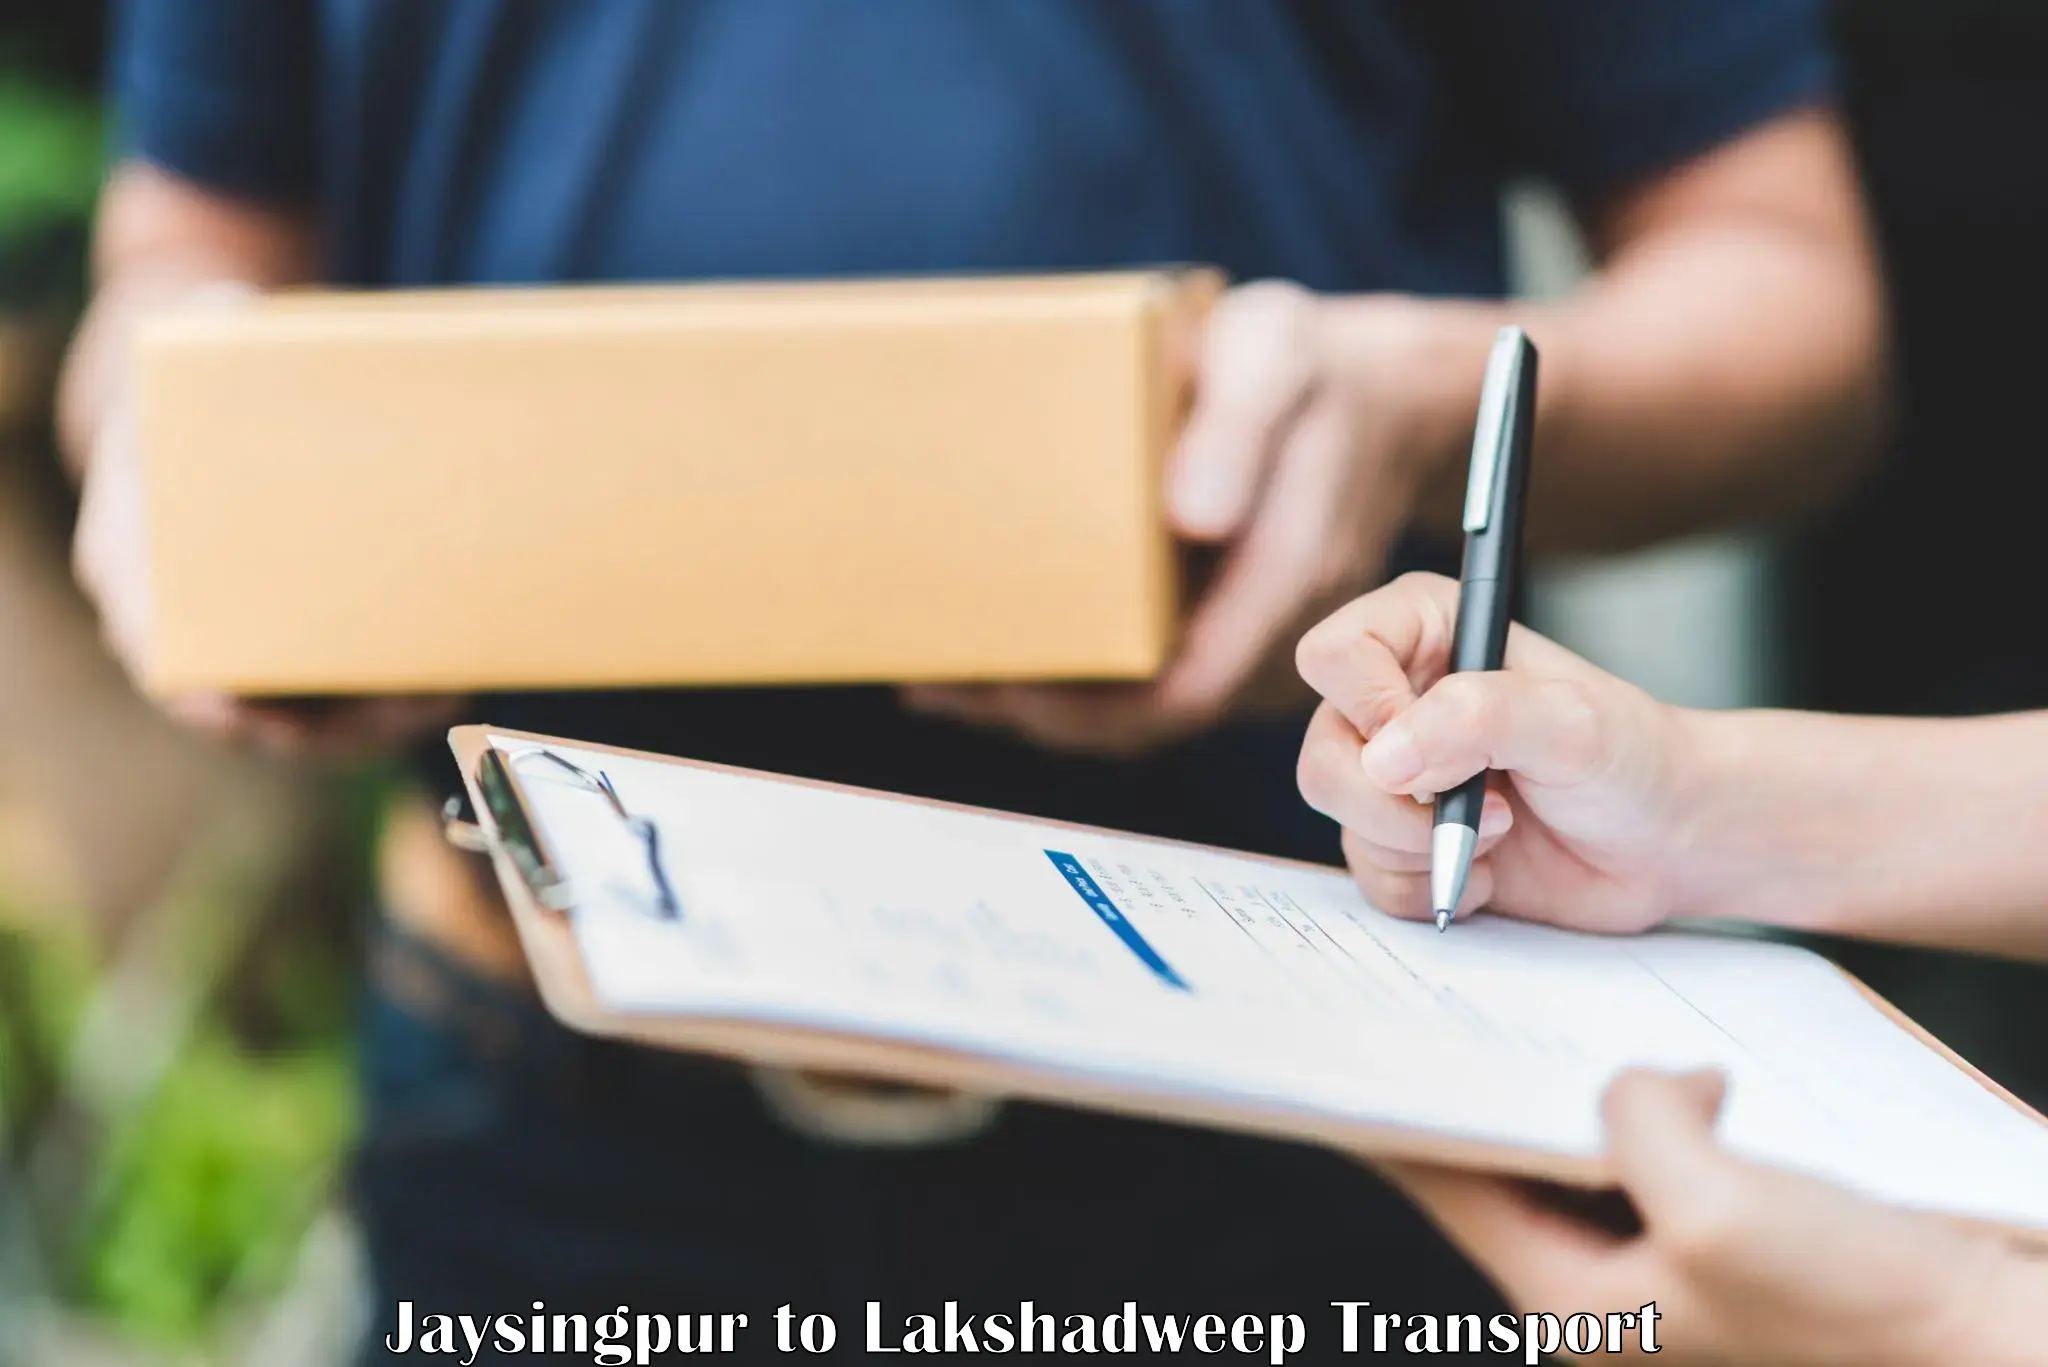 Road transport online services in Jaysingpur to Lakshadweep